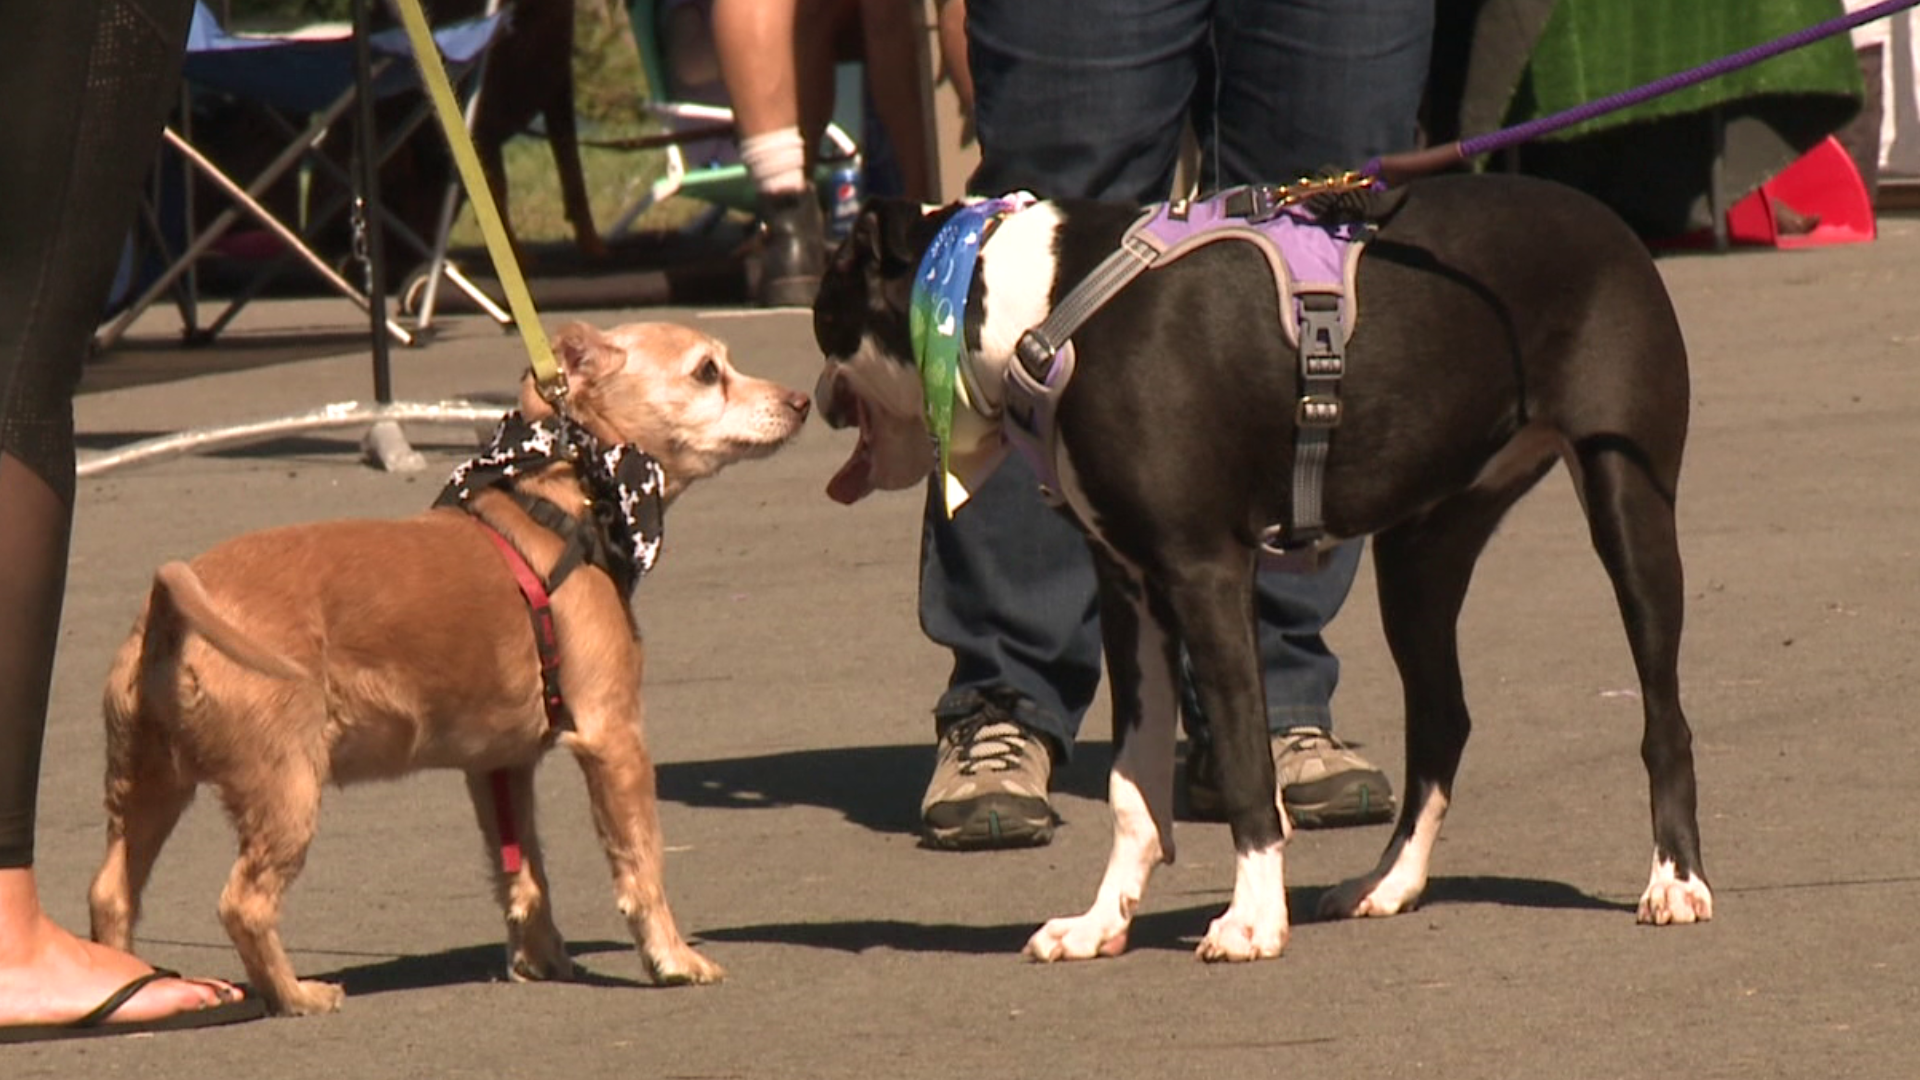 A winery hosted a dog-friendly festival on Sunday.